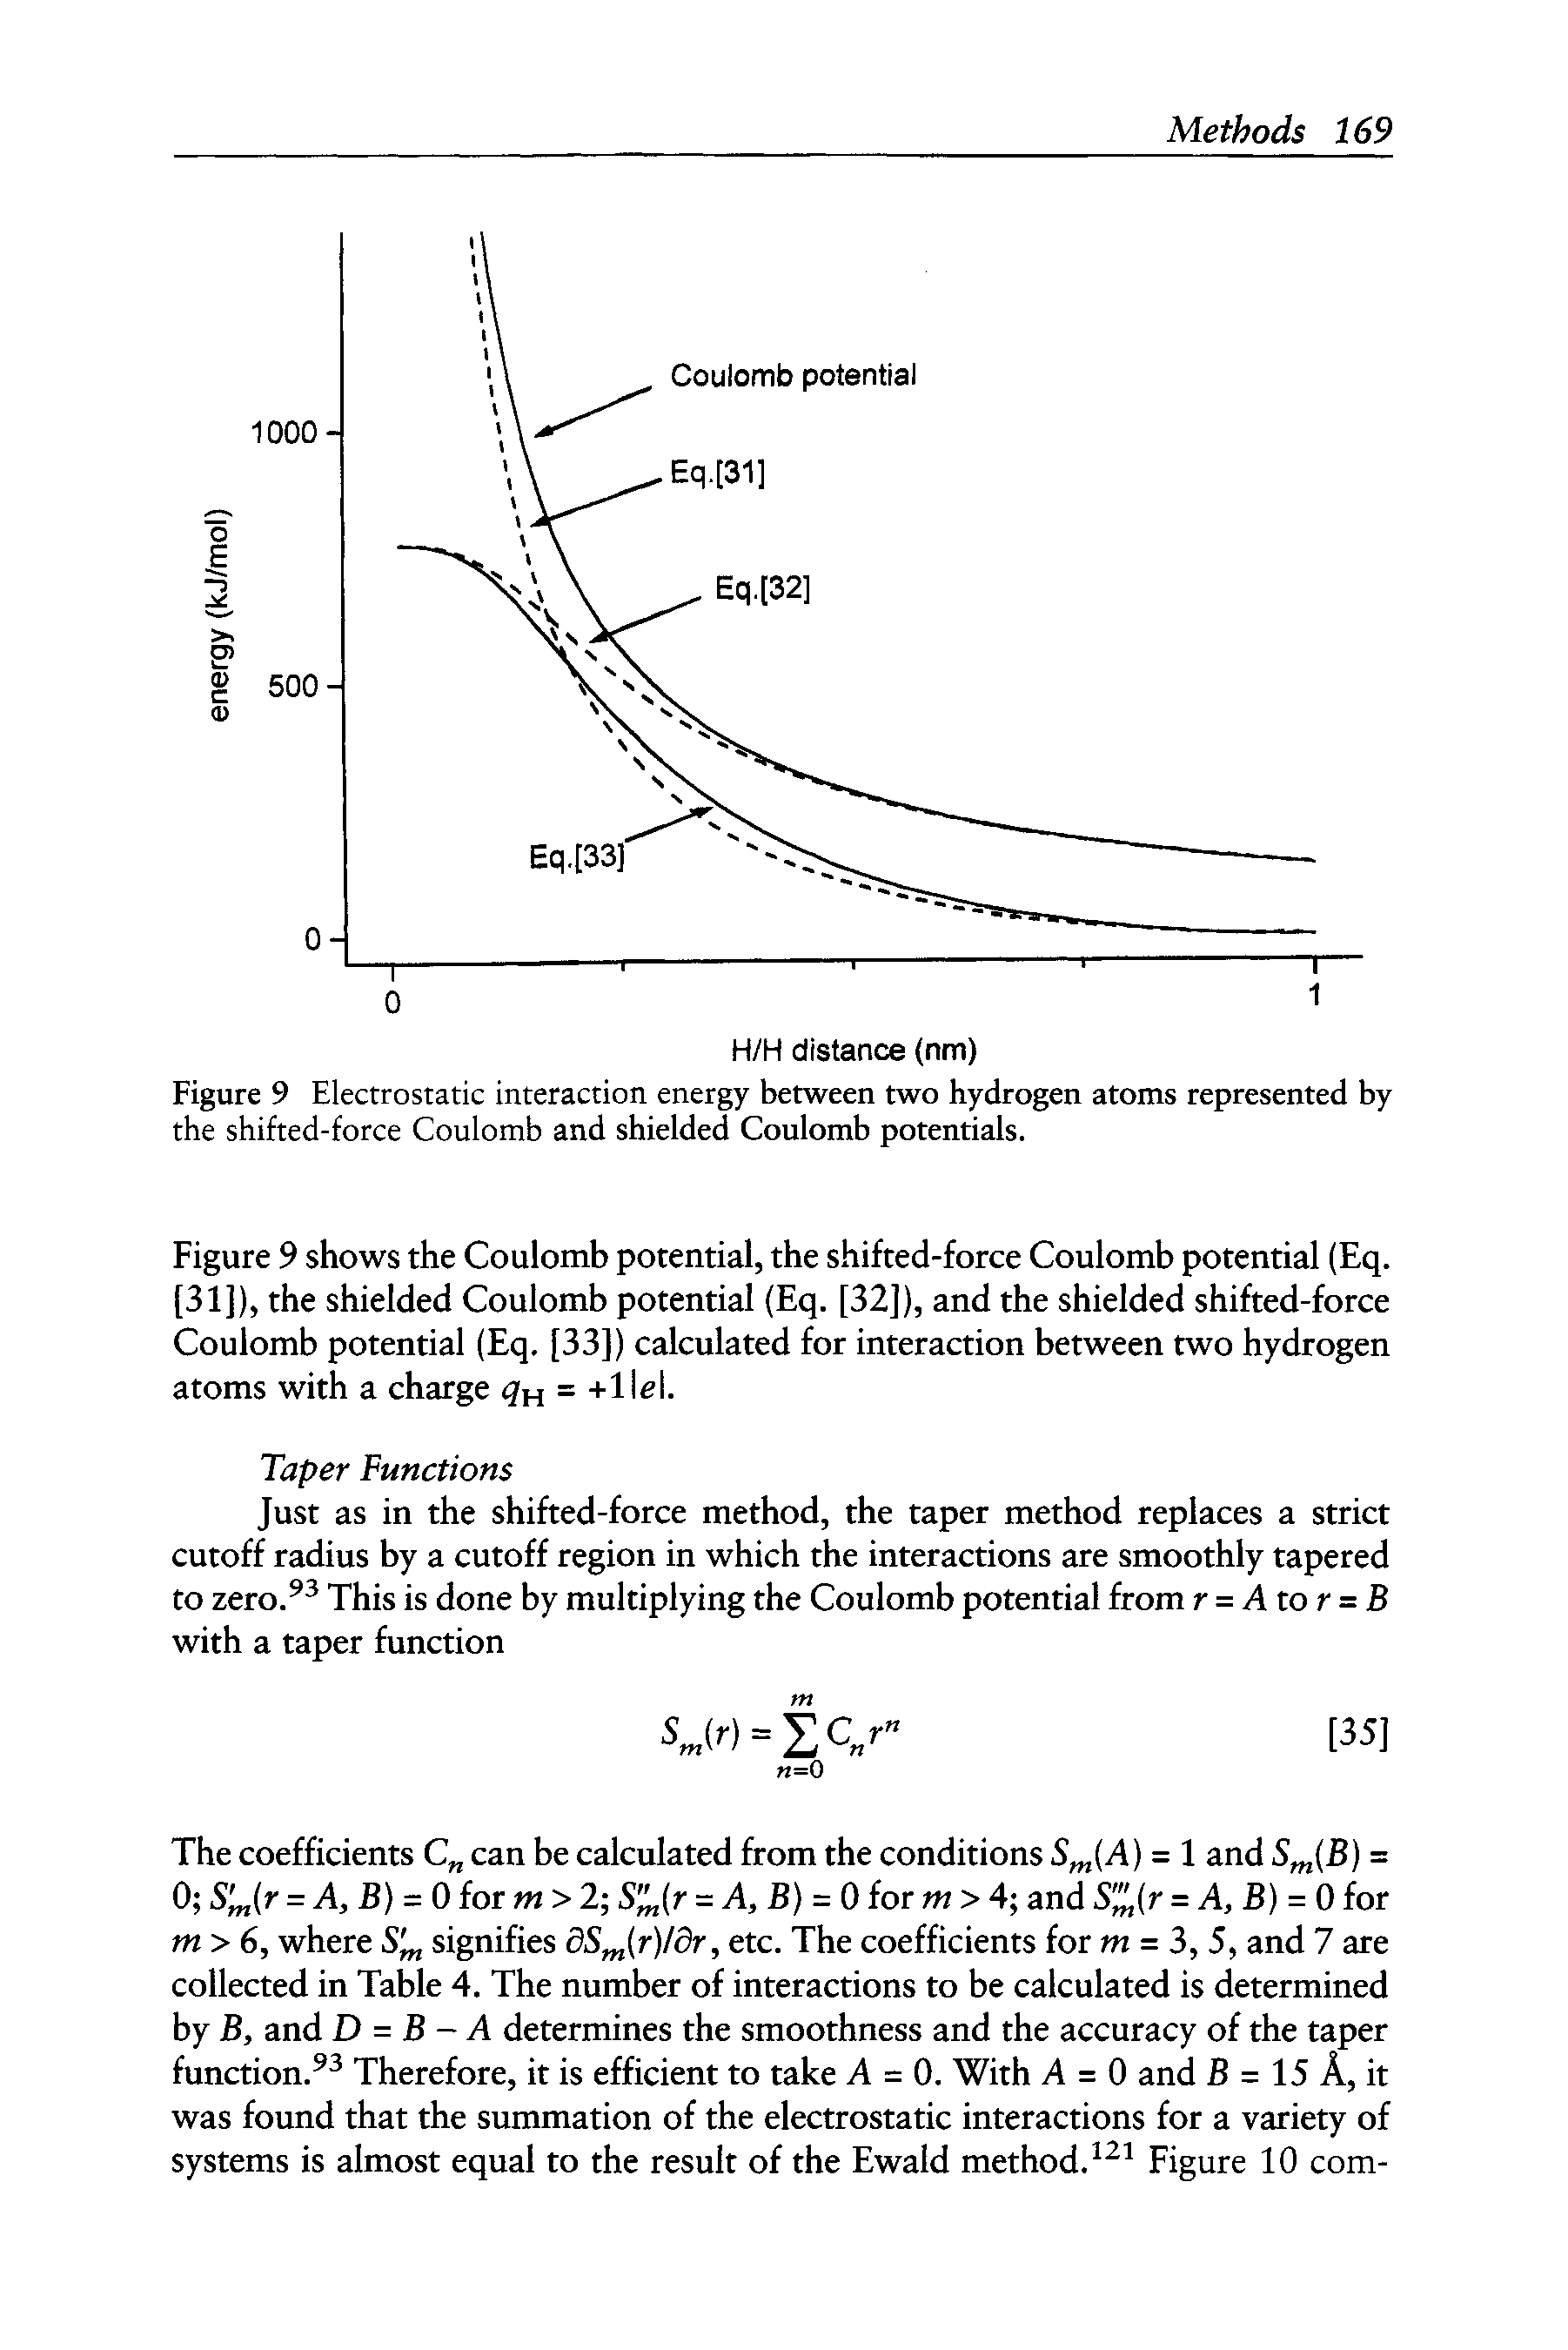 Figure 9 Electrostatic interaction energy between two hydrogen atoms represented by the shifted-force Coulomb and shielded Coulomb potentials.